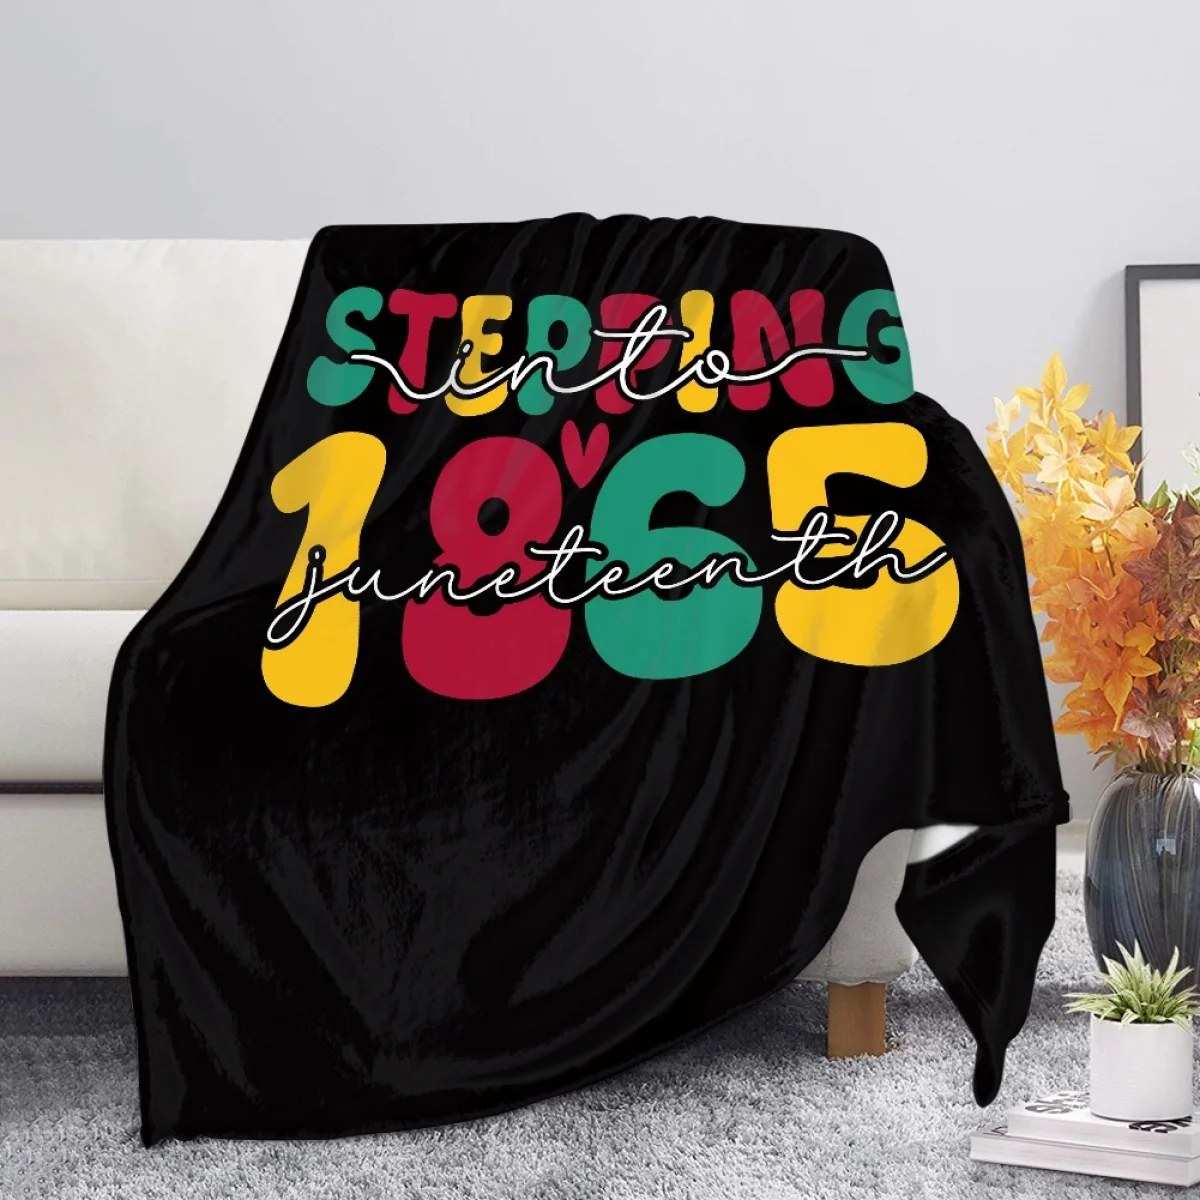 

TOADDMOS New Black History Month Juneteenth 1865 Blanket for Beds Soft Warm Cozy Girls Throw Blanket Portable Travel Thin Quilt